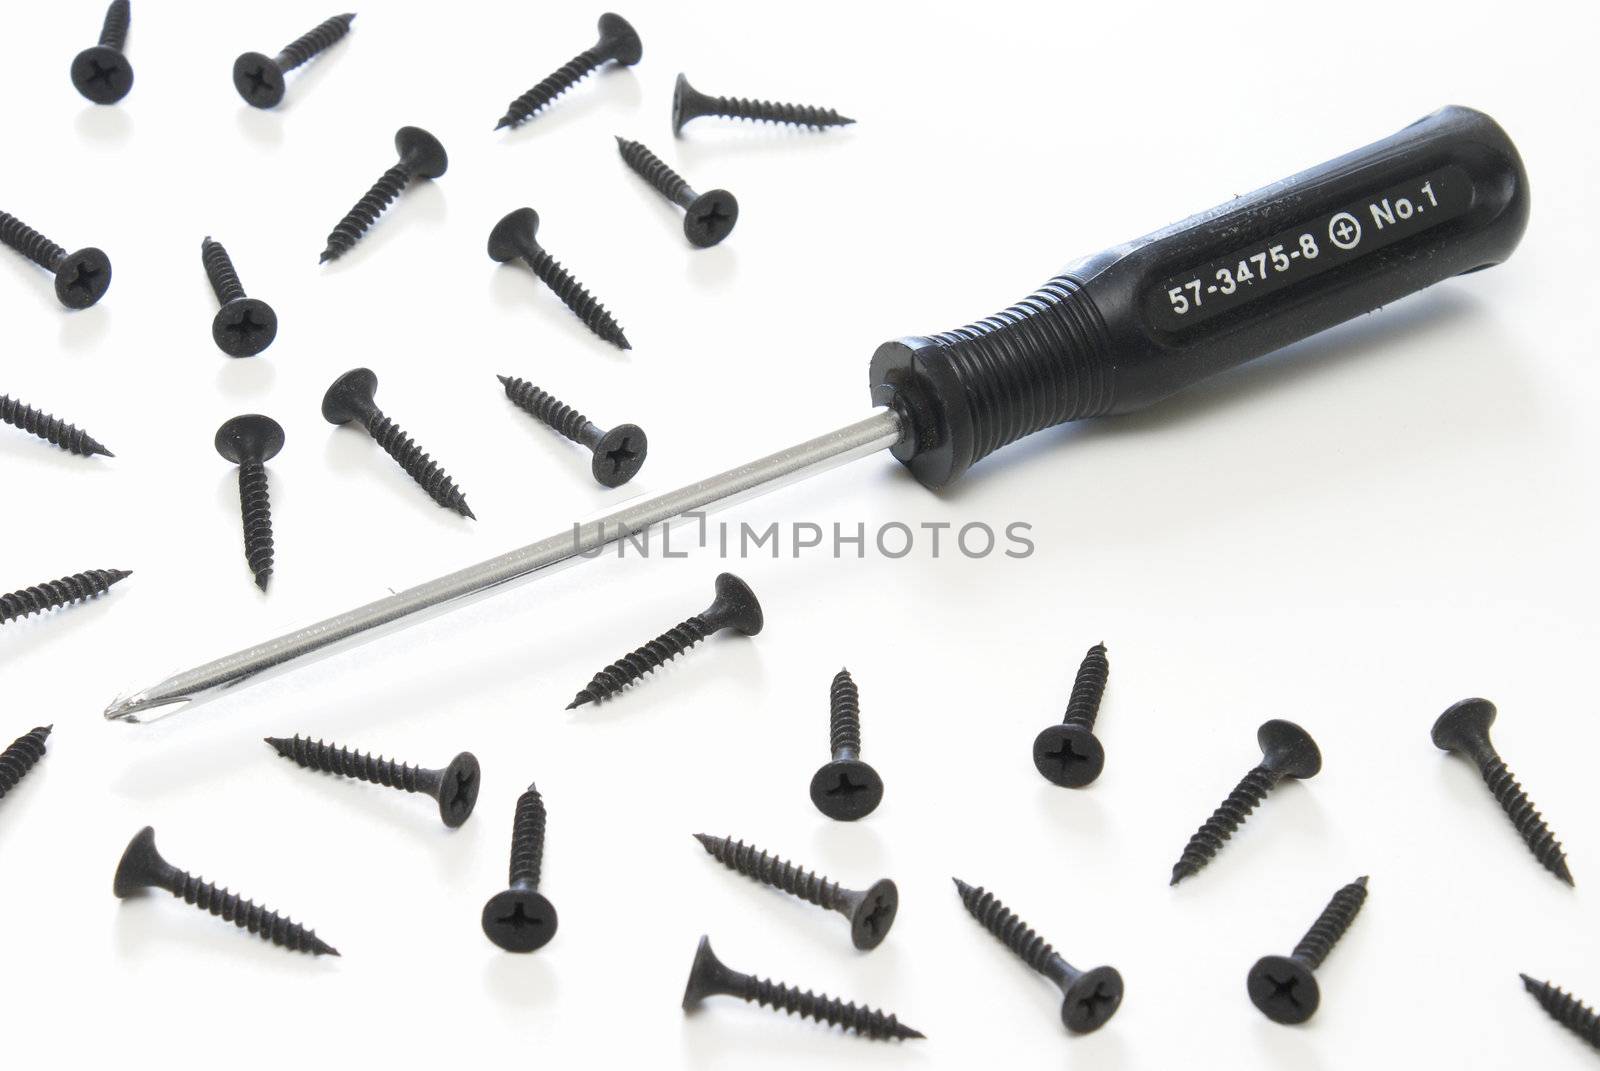 A starhead screwdriver with starhead screws on a white background.